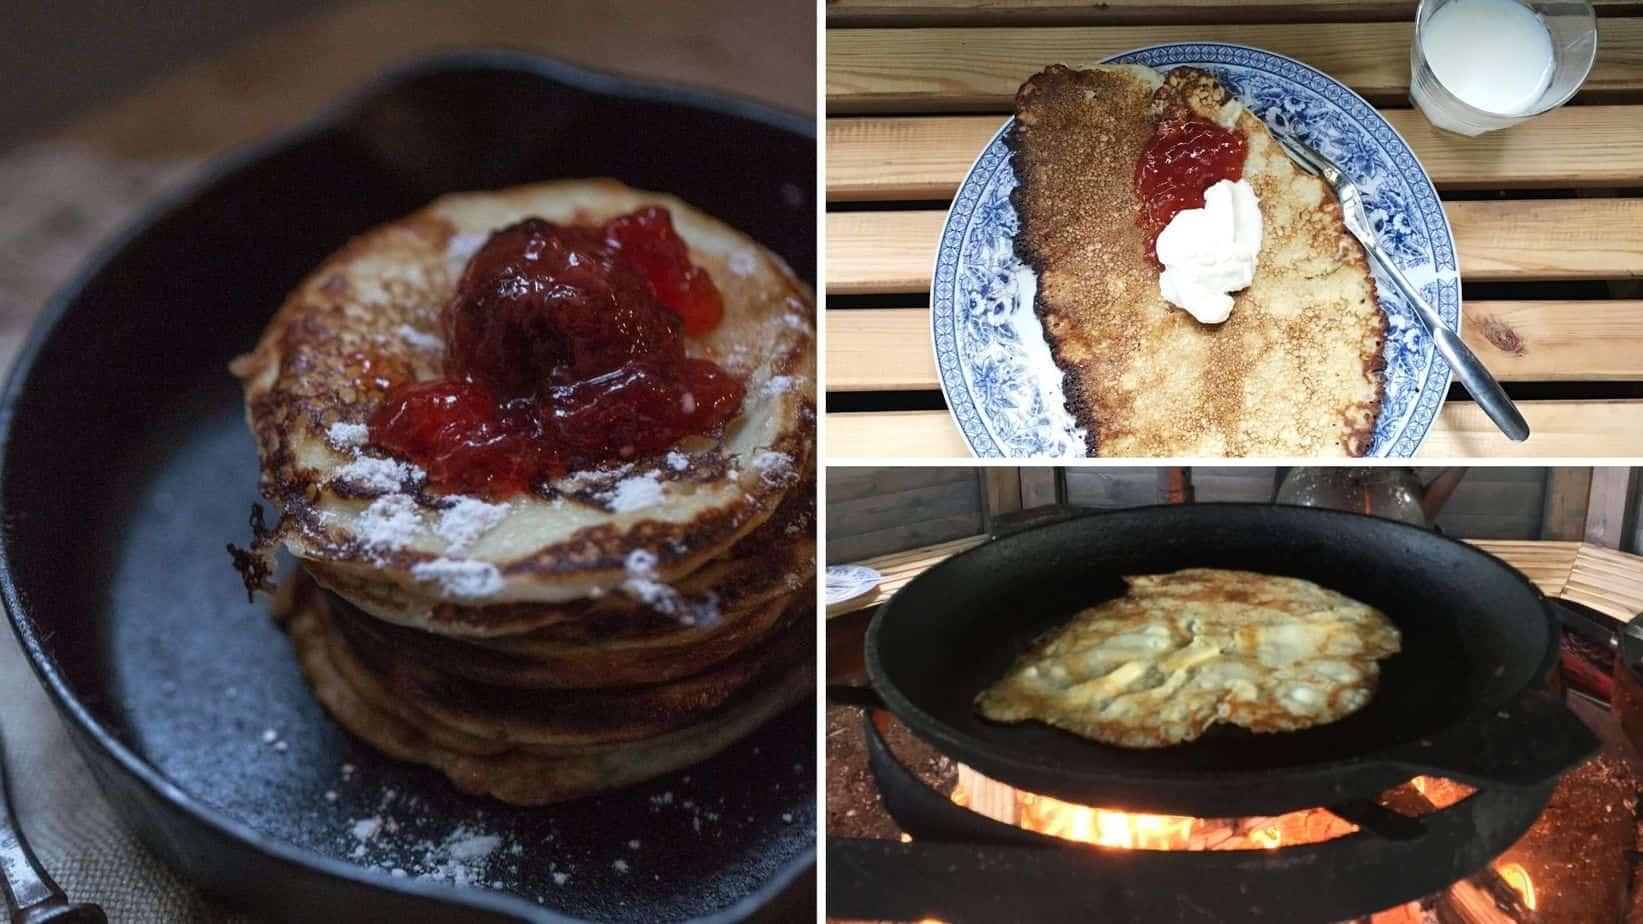 Finnish crepes with red strawberry jam